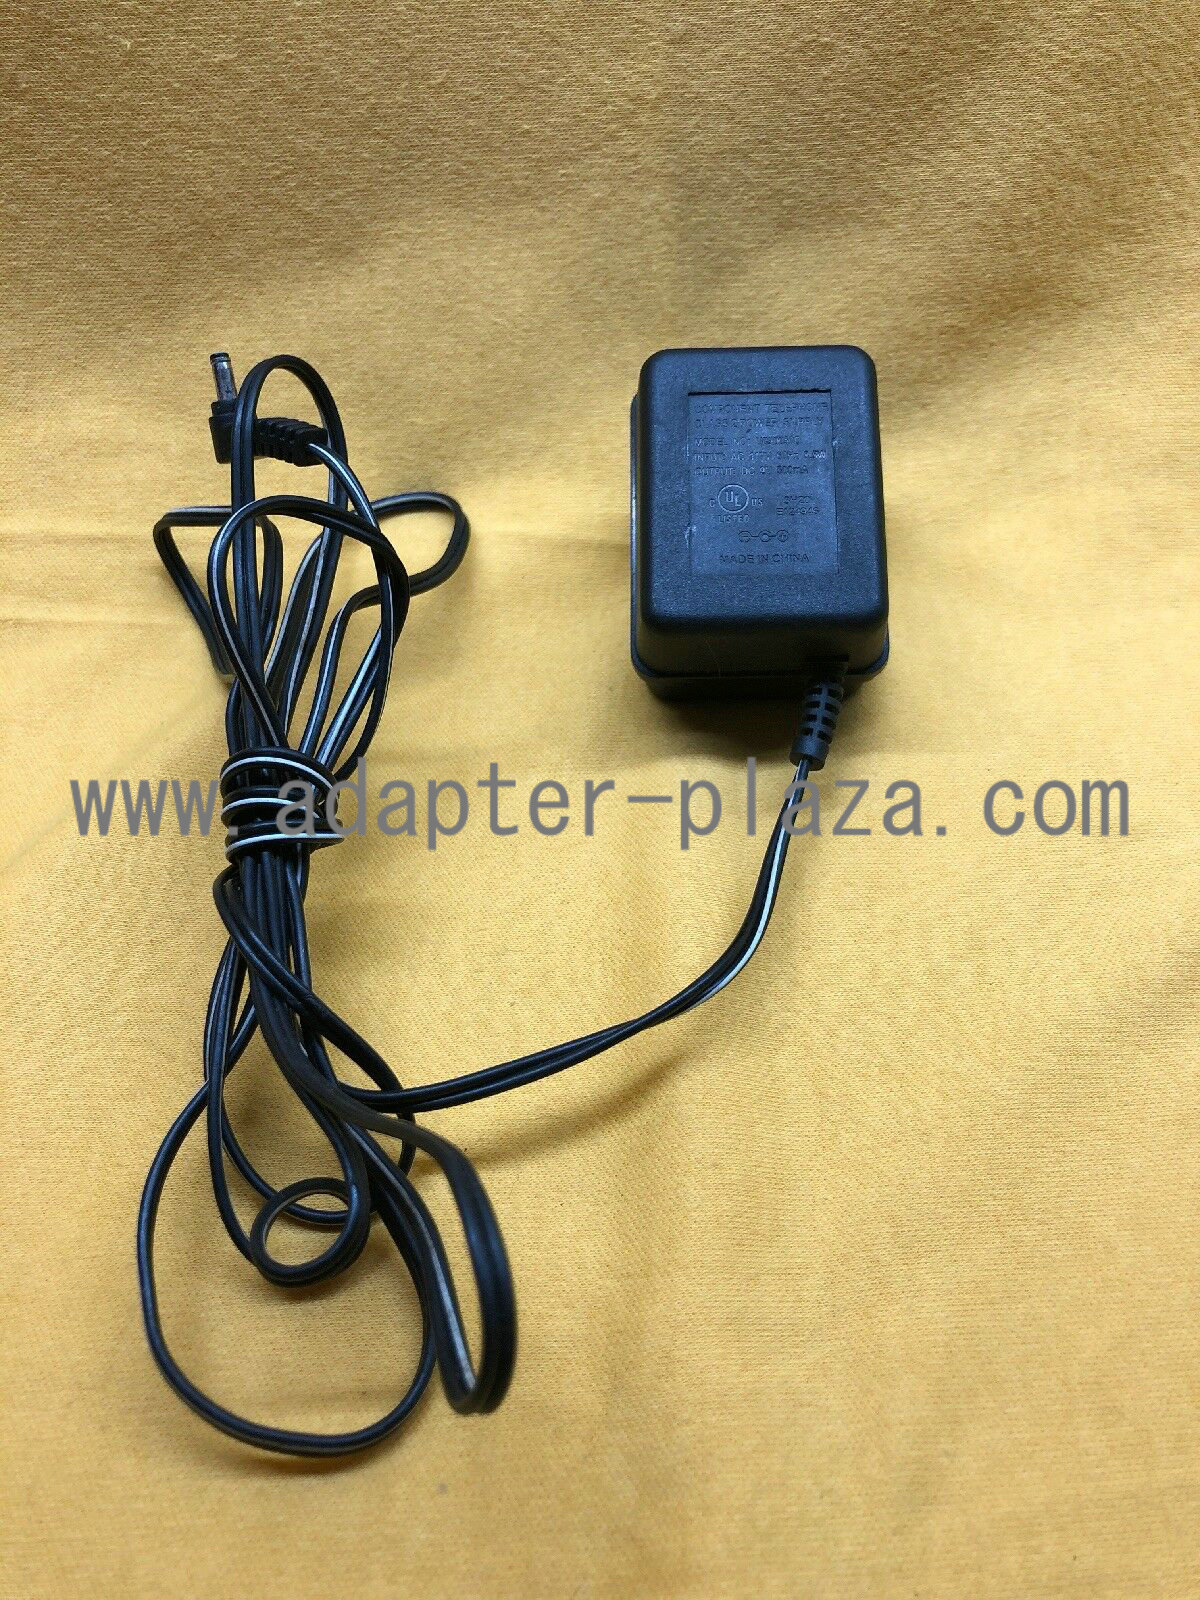 New Component Telephone U090050D 9V 500mA AC DC Class 2 Power Supply Adapter Charger - Click Image to Close